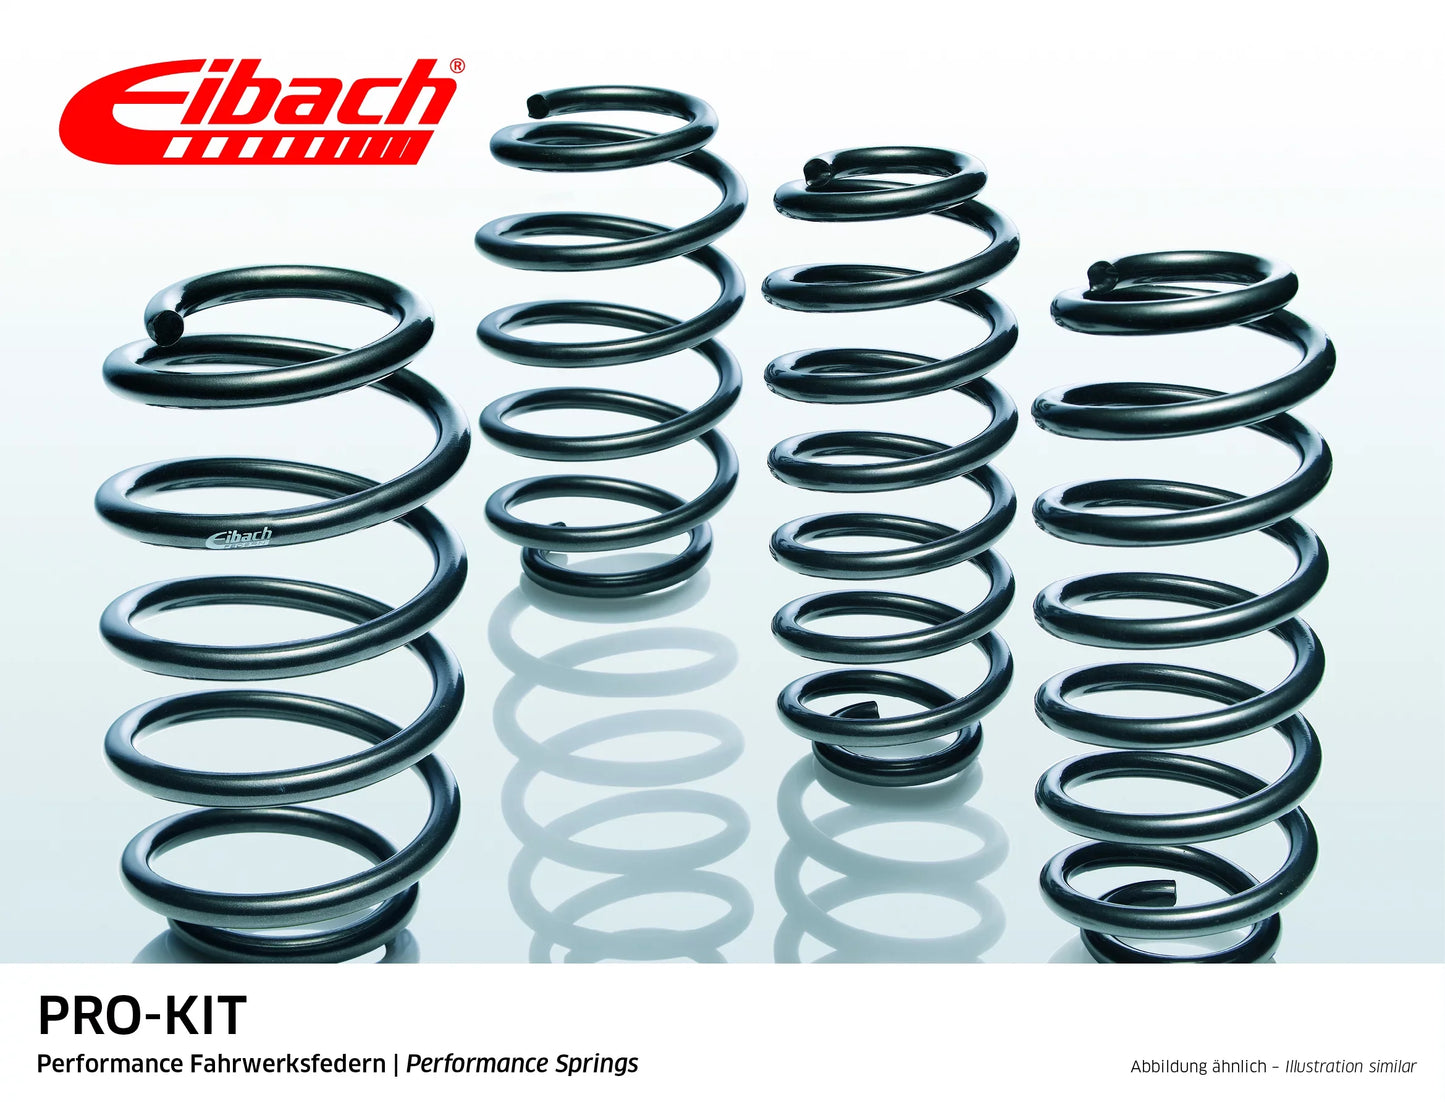 Eibach Pro-Kit Lowering Springs (E1565-140) at £315.99